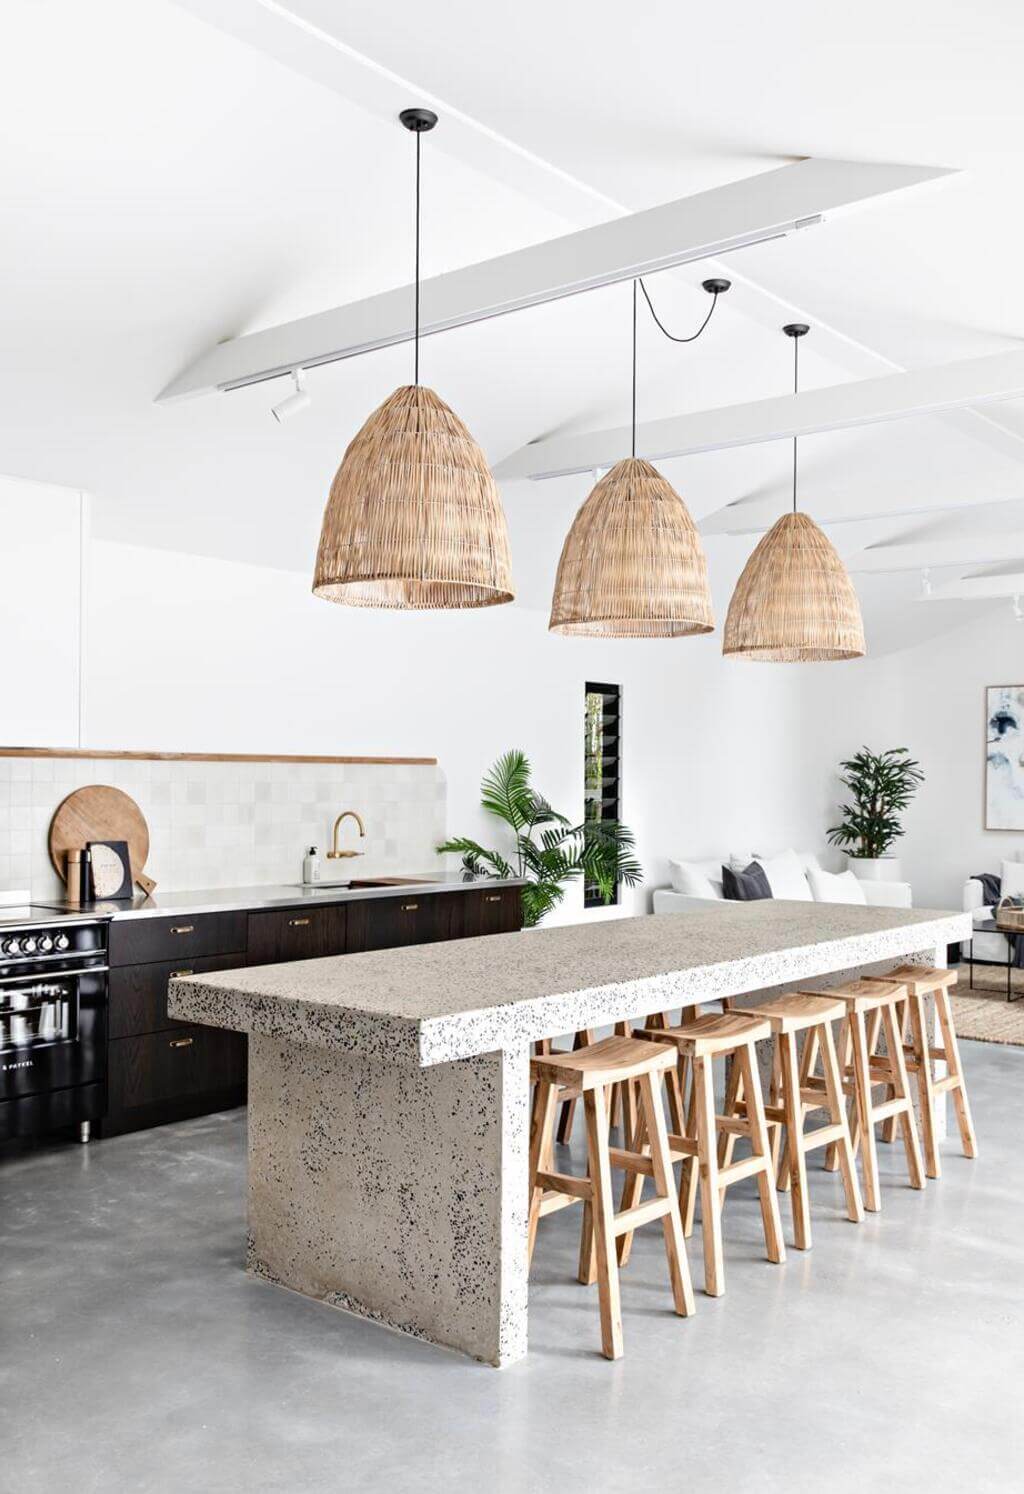 A kitchen with a counter and stools in it
